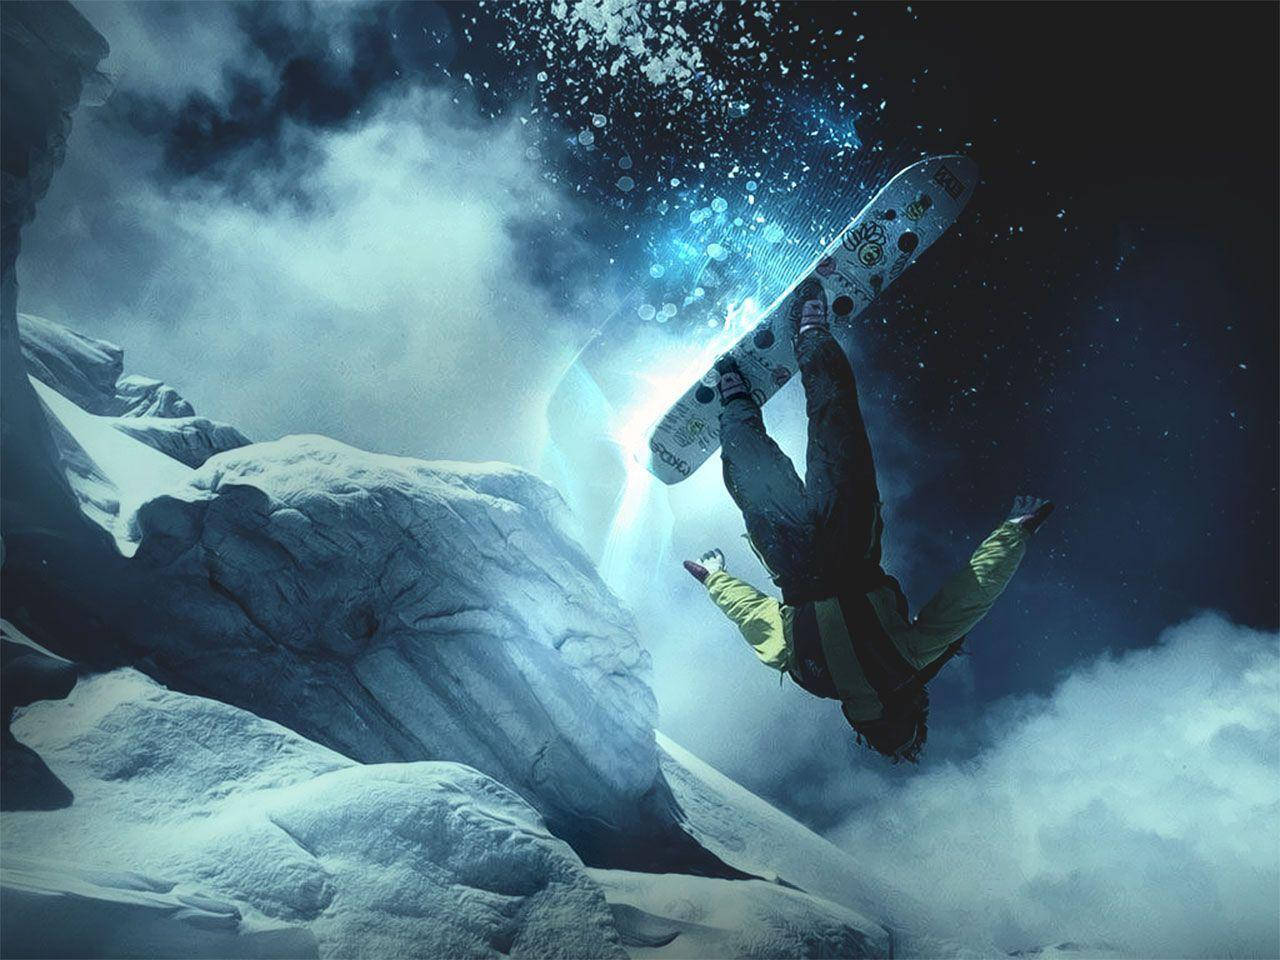 Man In Yellow Does Flip With A Snowboard Background